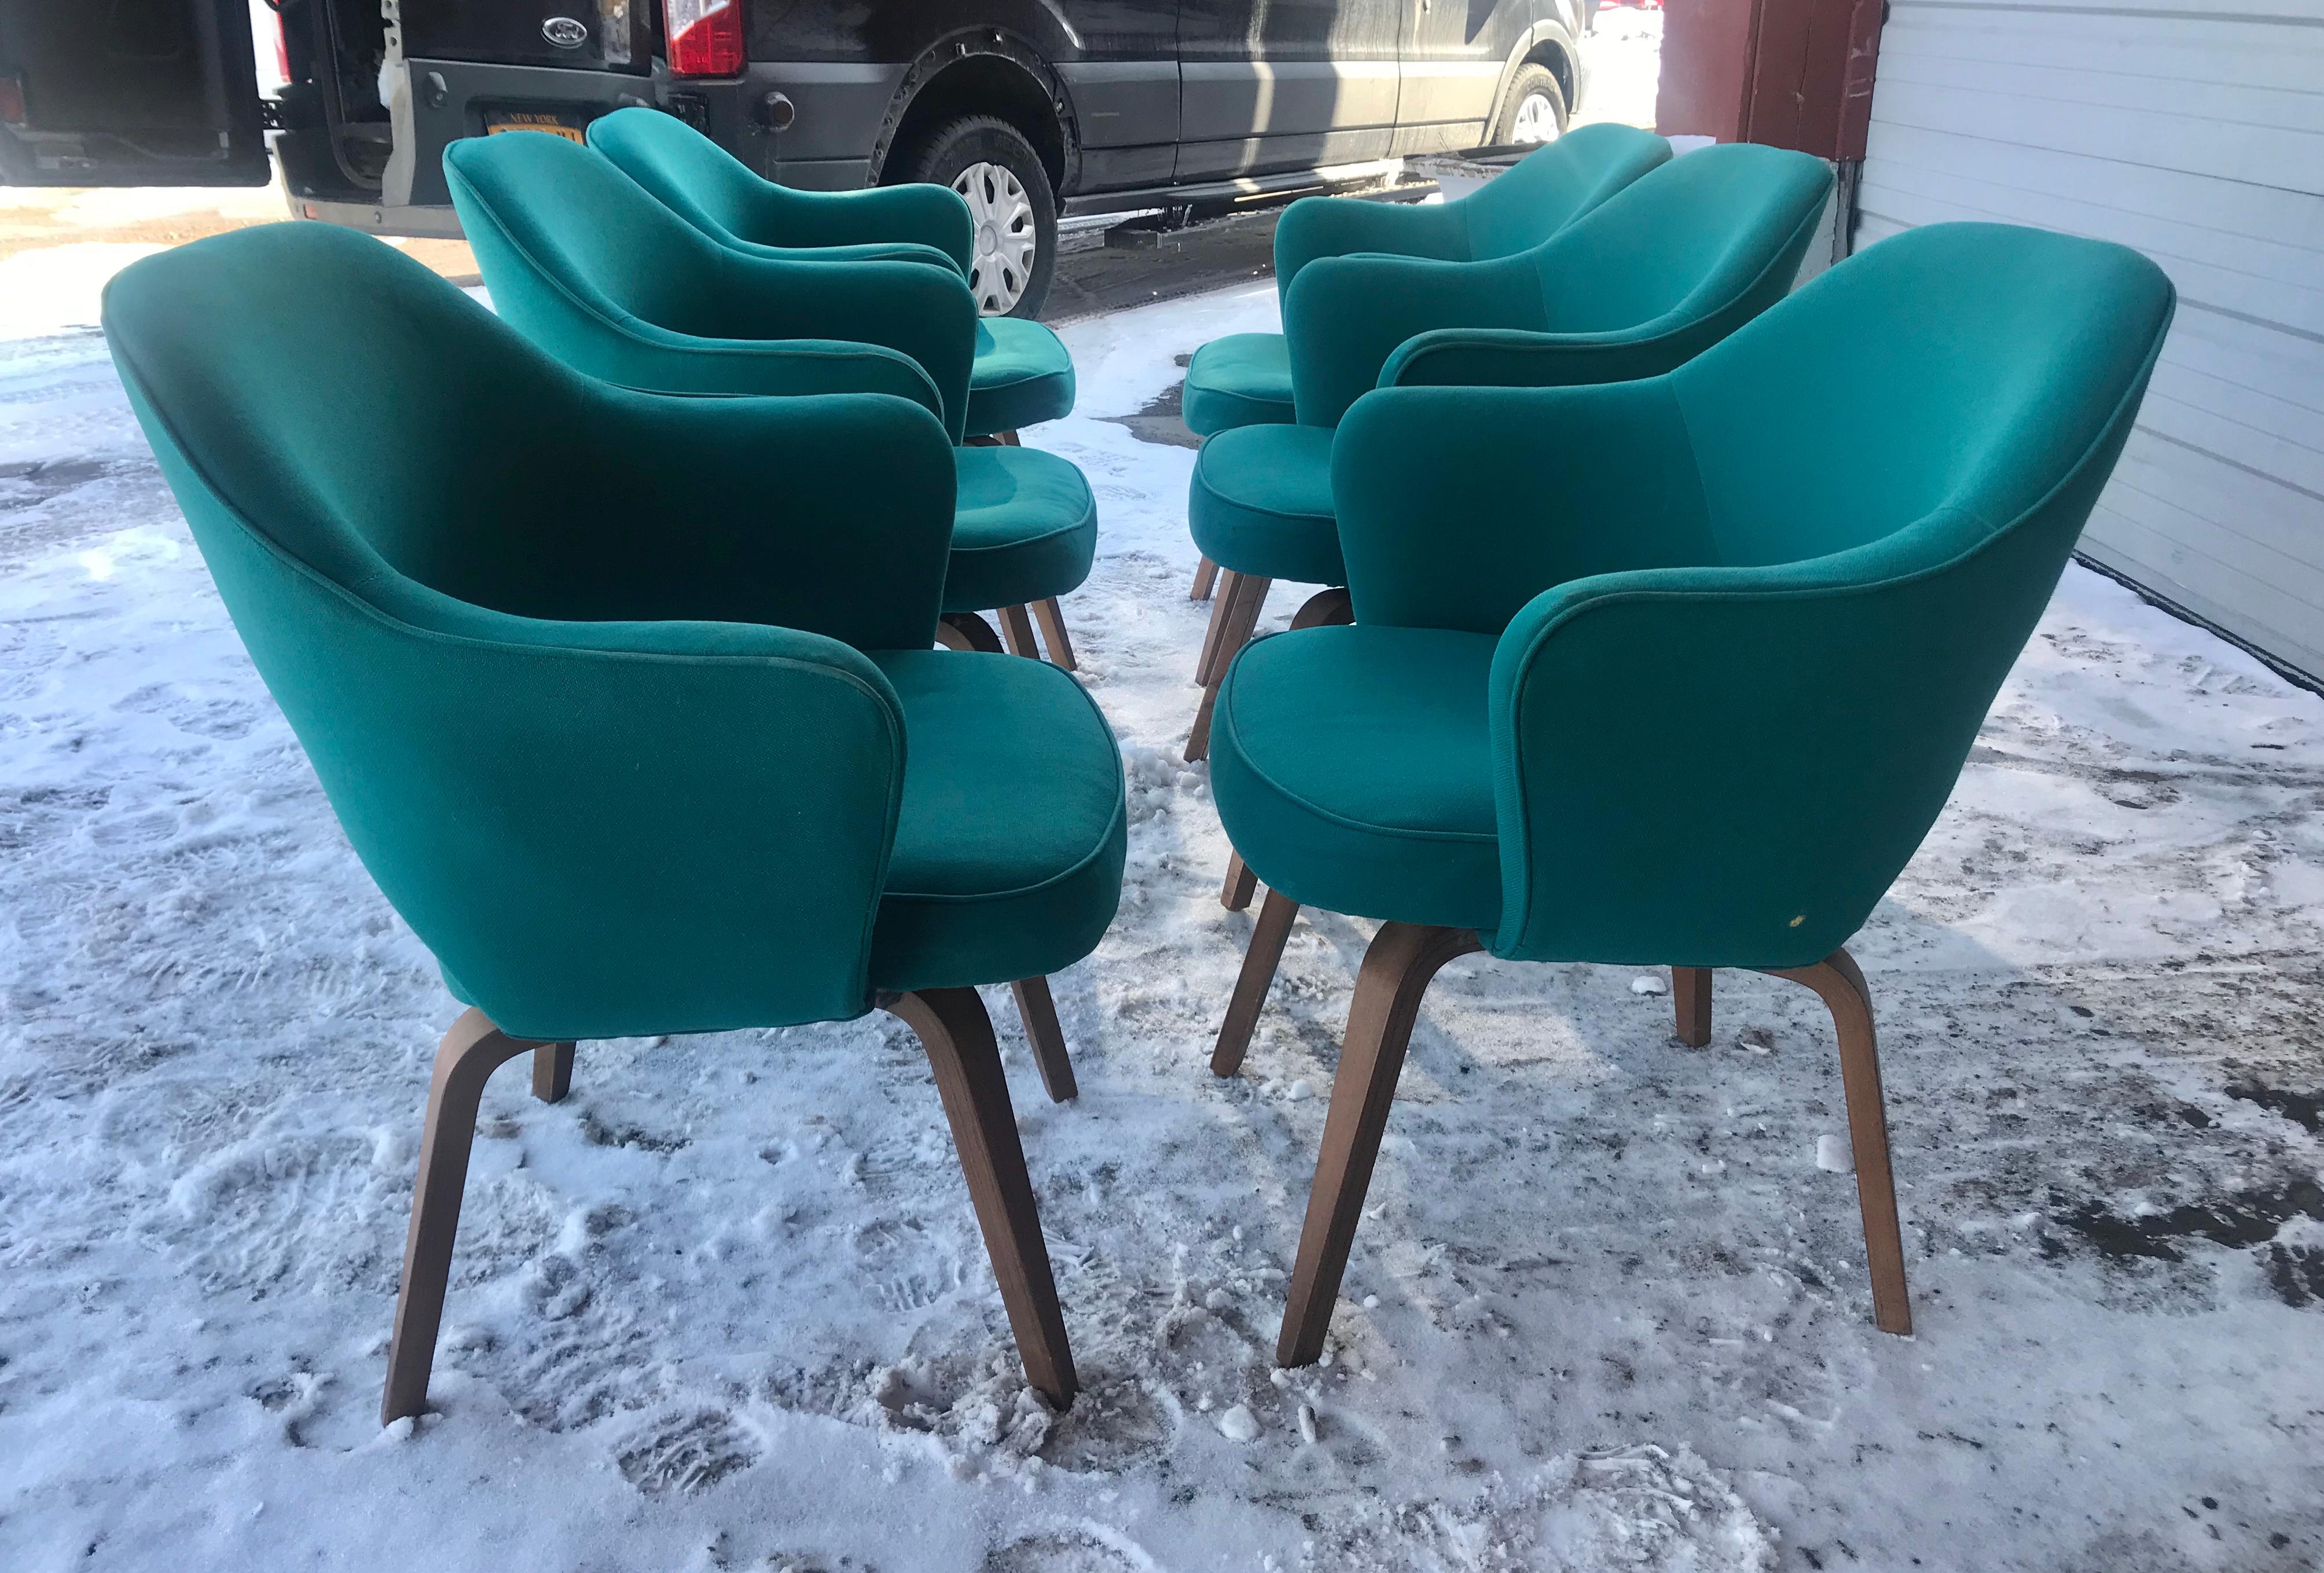 Nice early production set of 6 executive armchairs designed by Eero Saarinen manufactured by Knoll, I believe this set dates to late 1960s-early 1970s, retains original teal blue/green wool fabric and Classic bent walnut legs, Classic midcentury